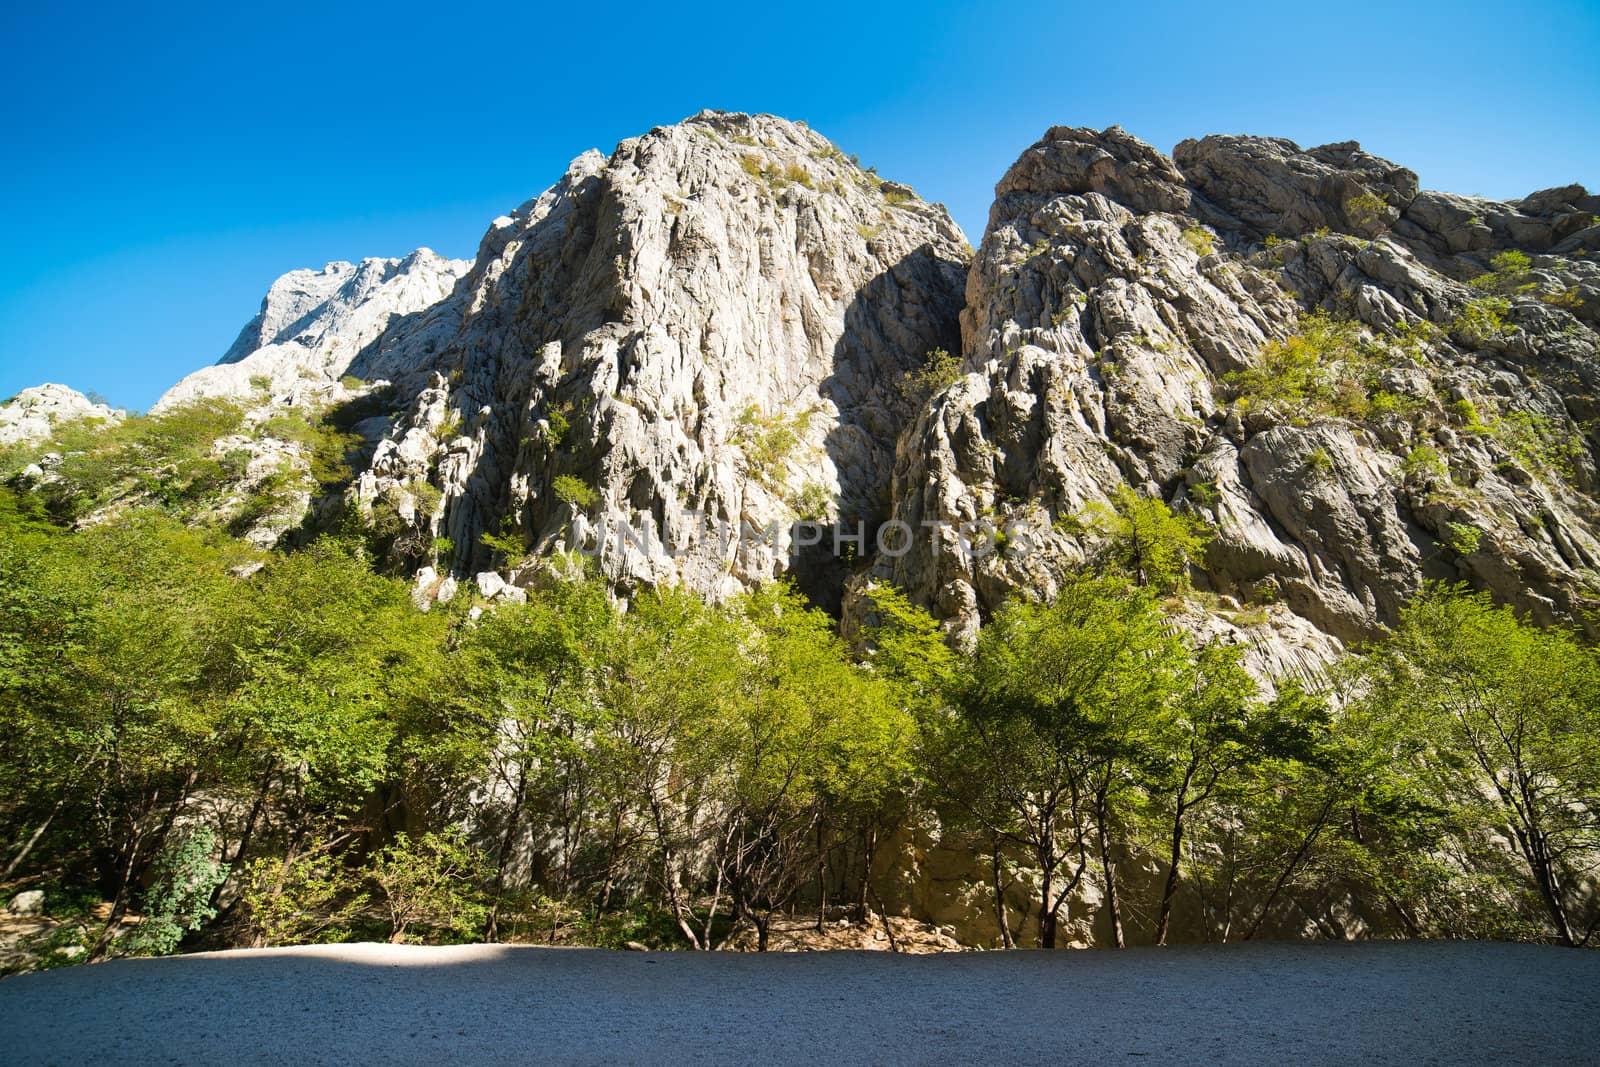 Canyon in Paklenica National Park - Velebit mountains